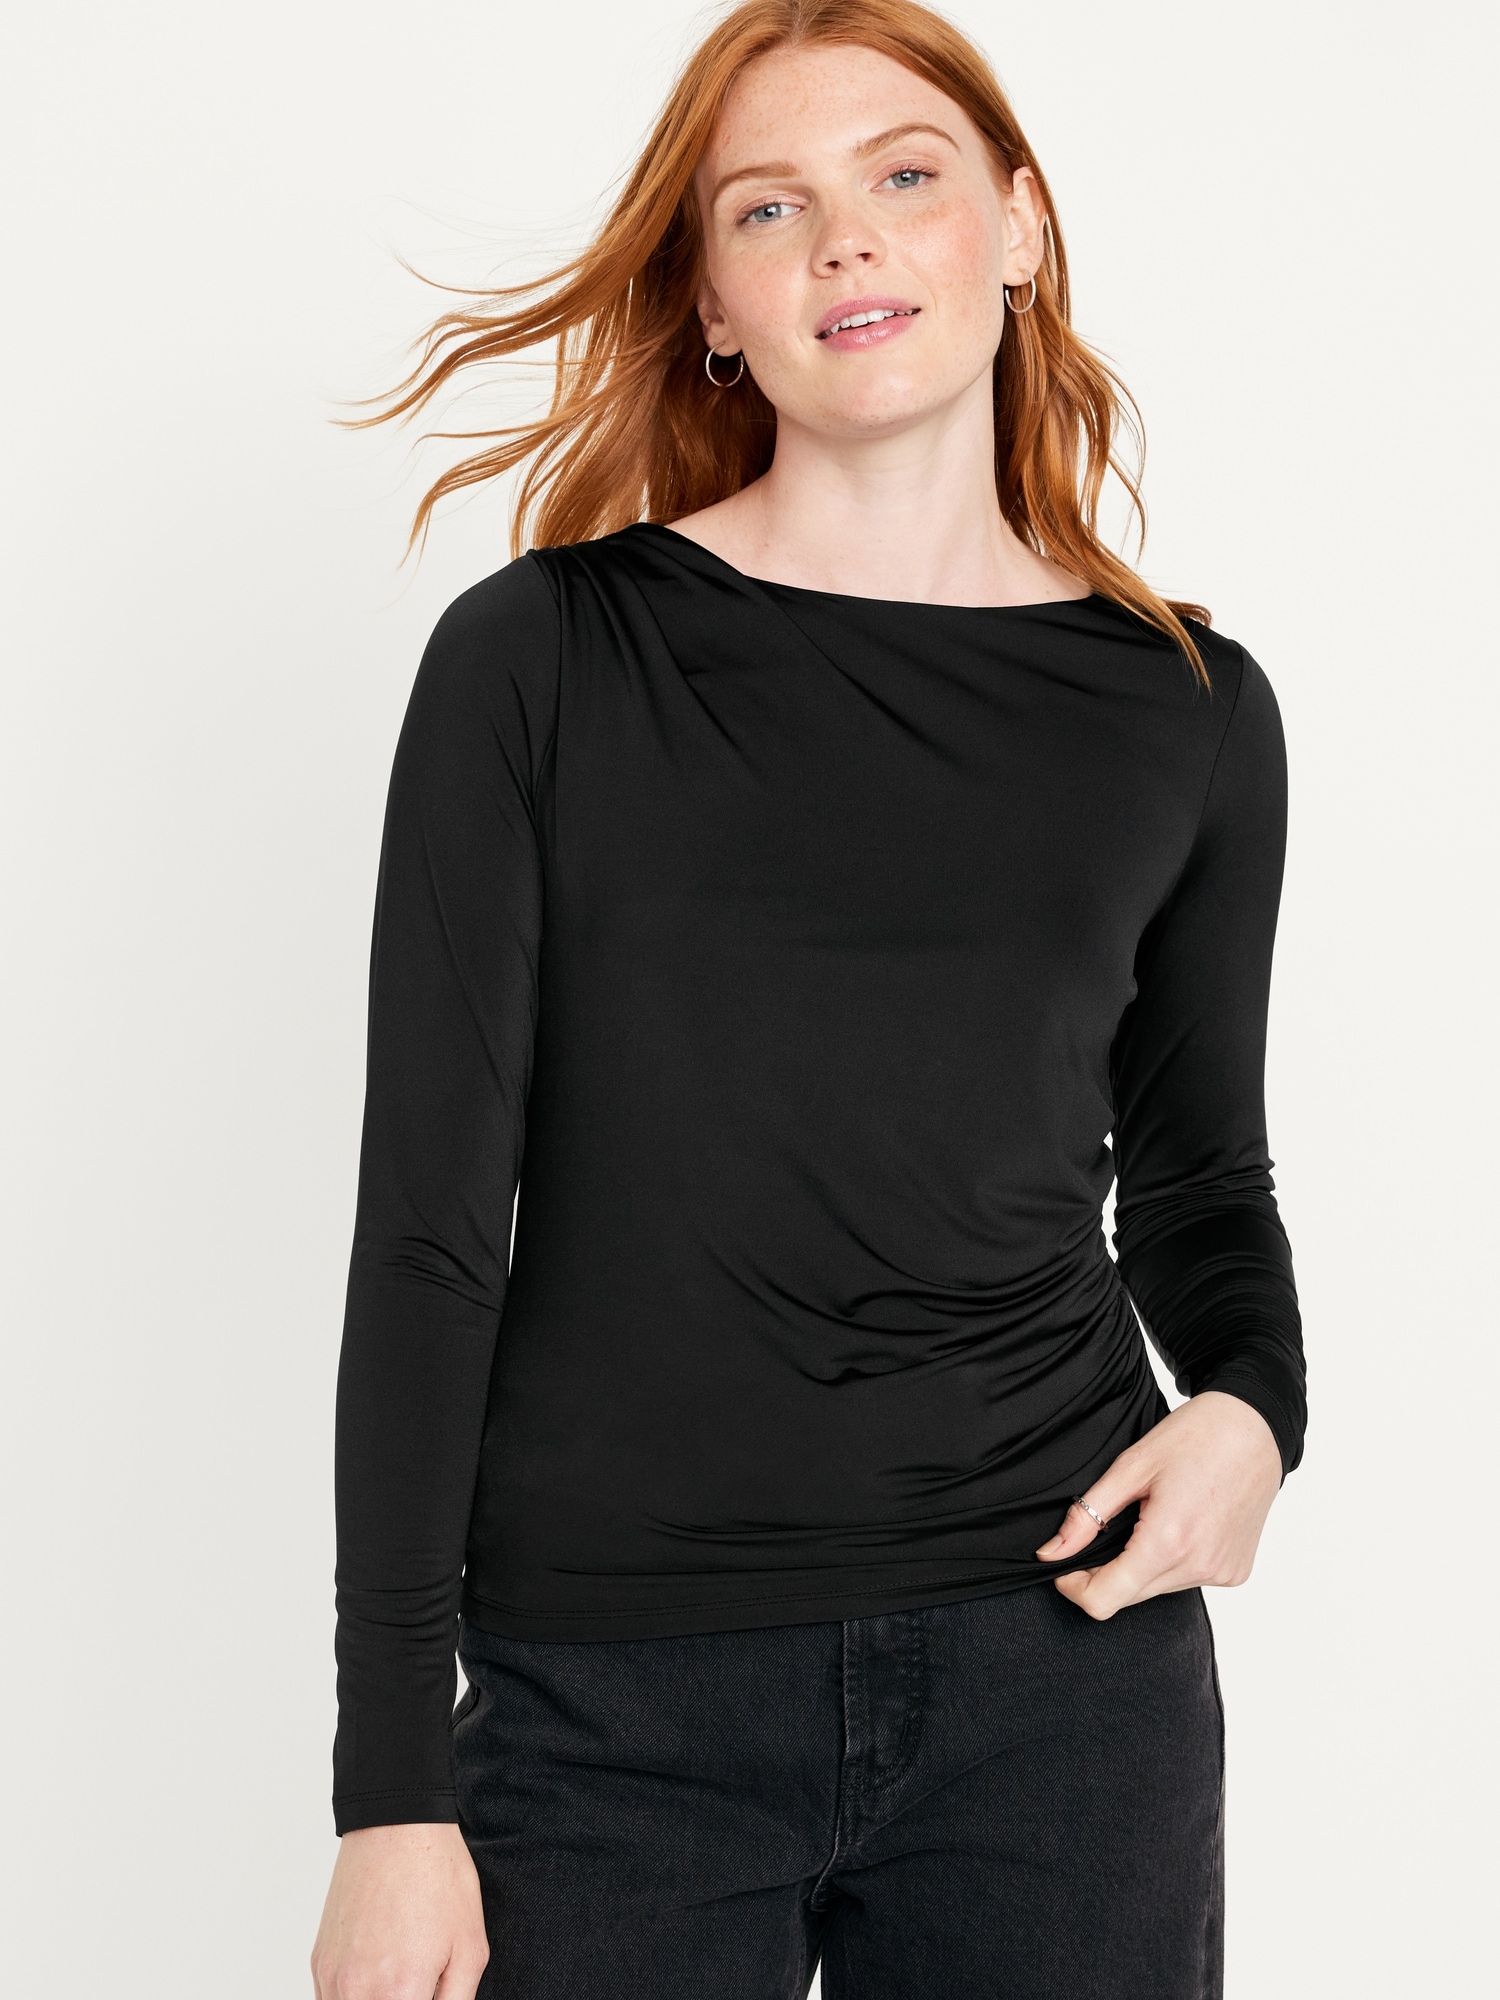 Stretchy Long Sleeve Tops